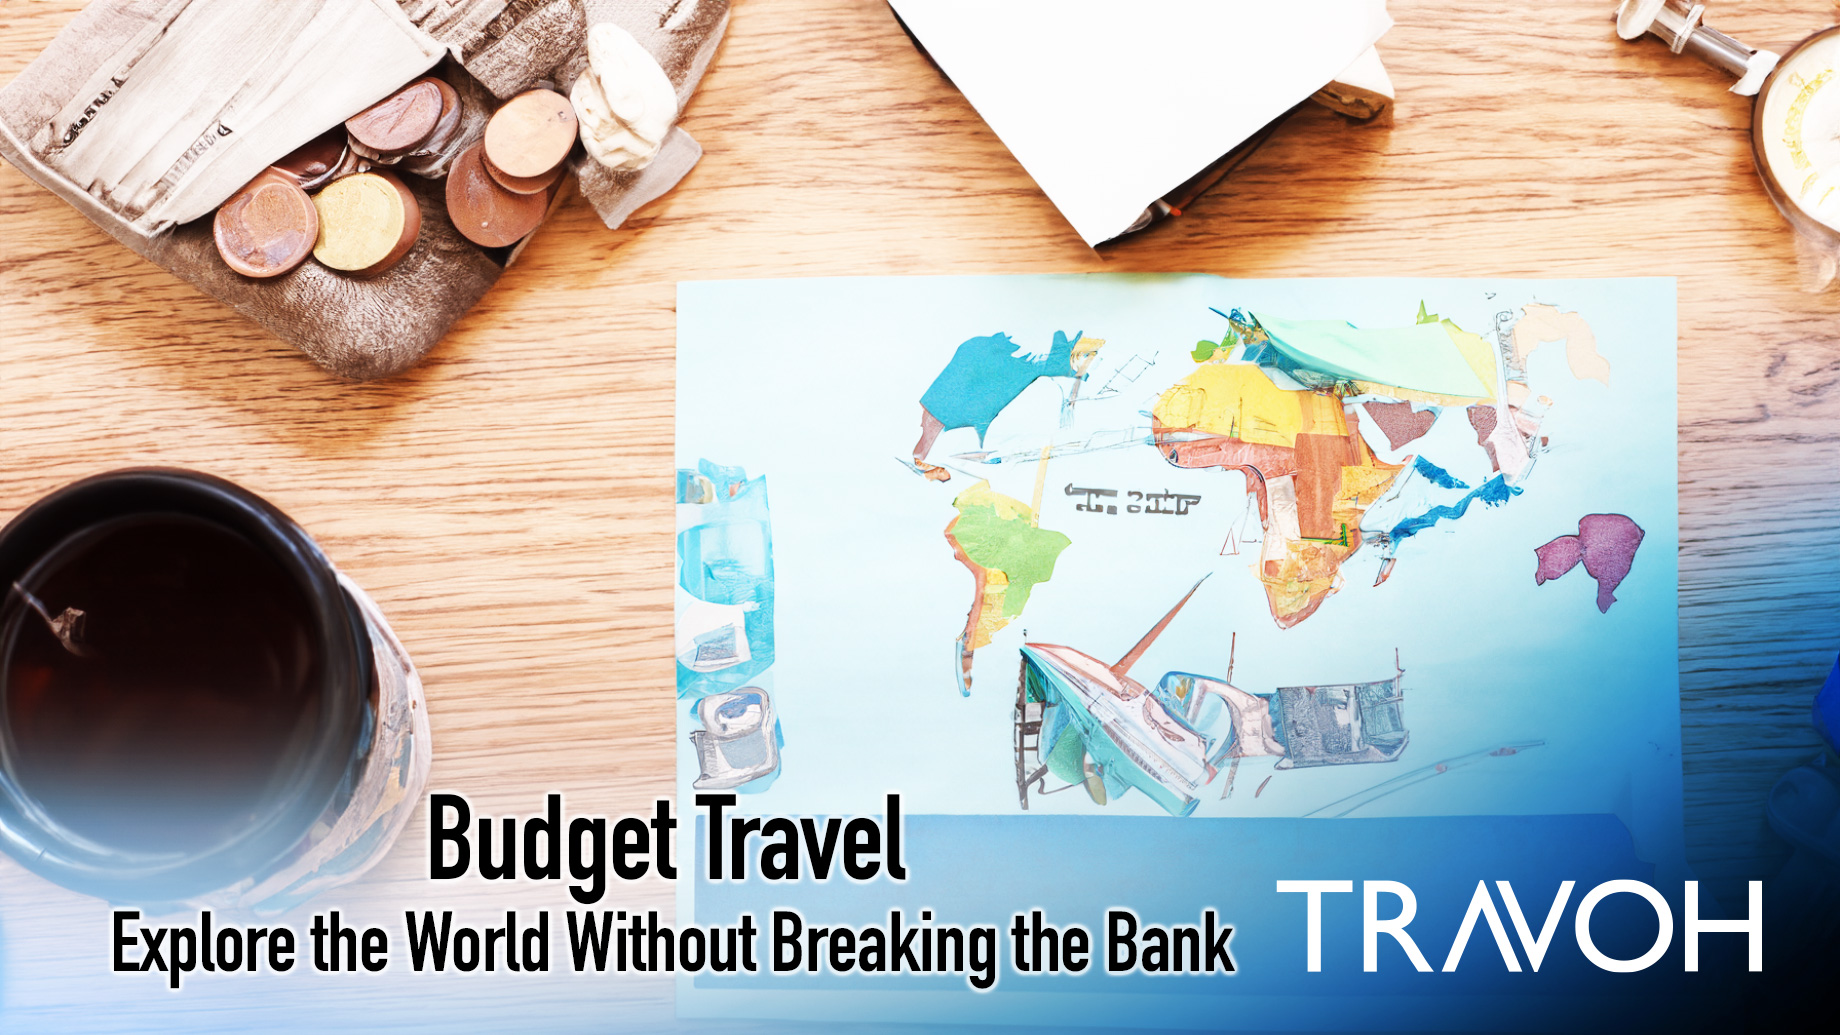 Budget Travel - Explore the World Without Breaking the Bank